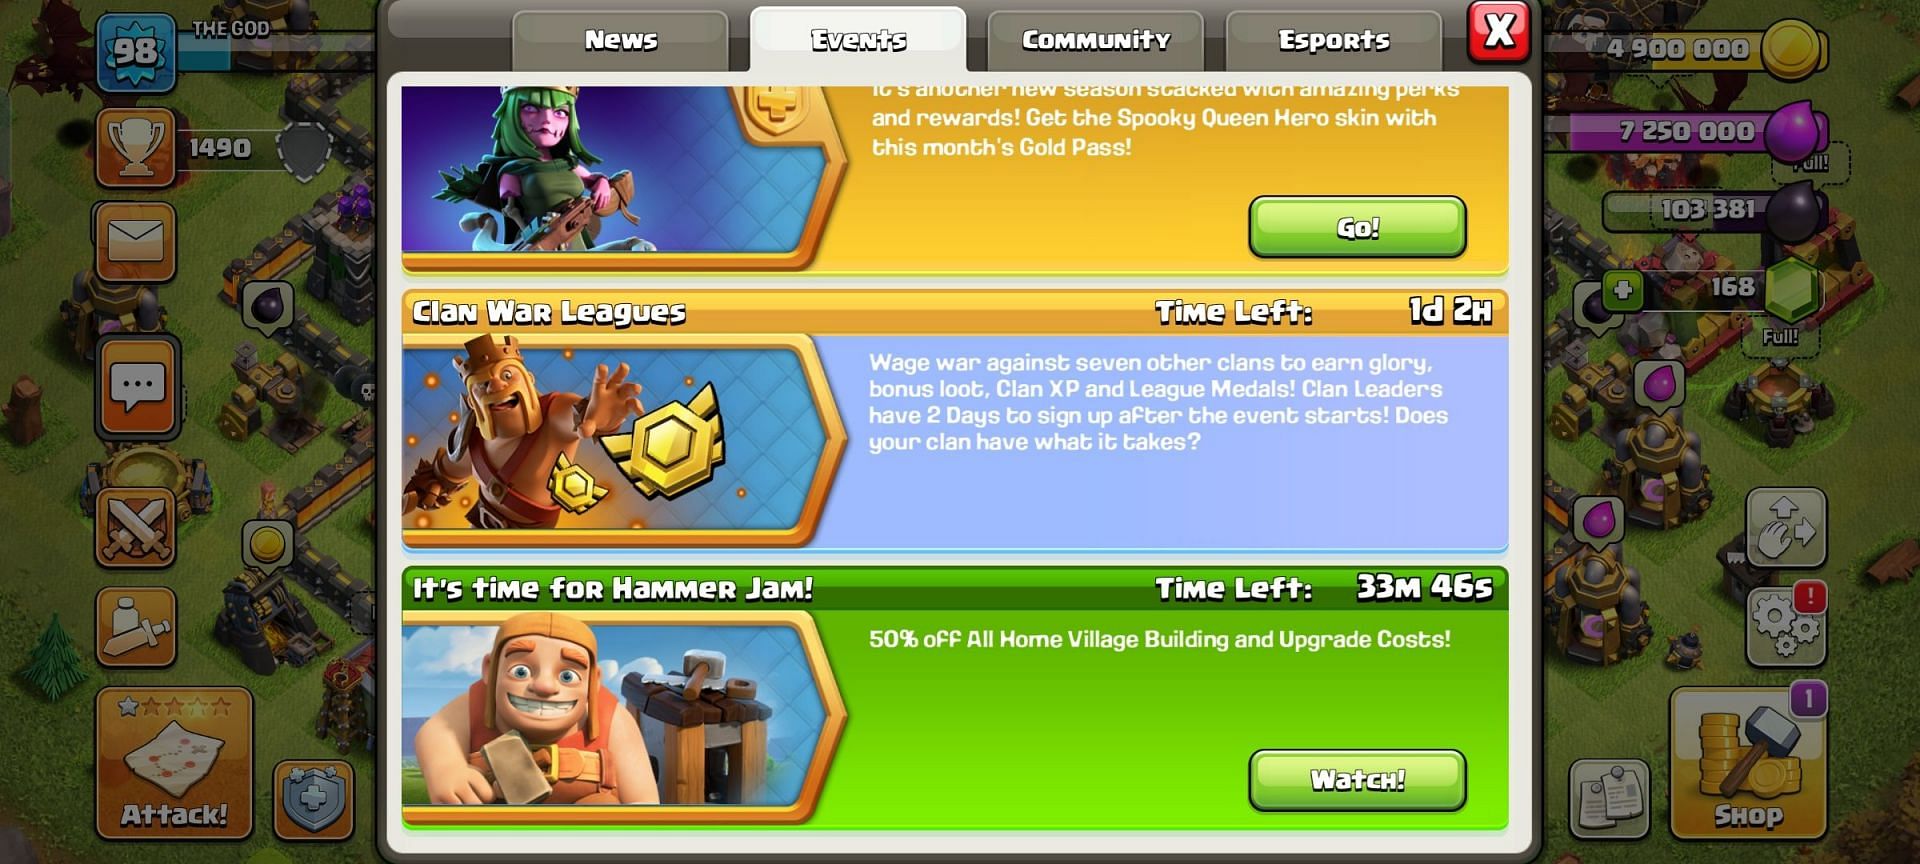 The events will end very soon (Image via Supercell)